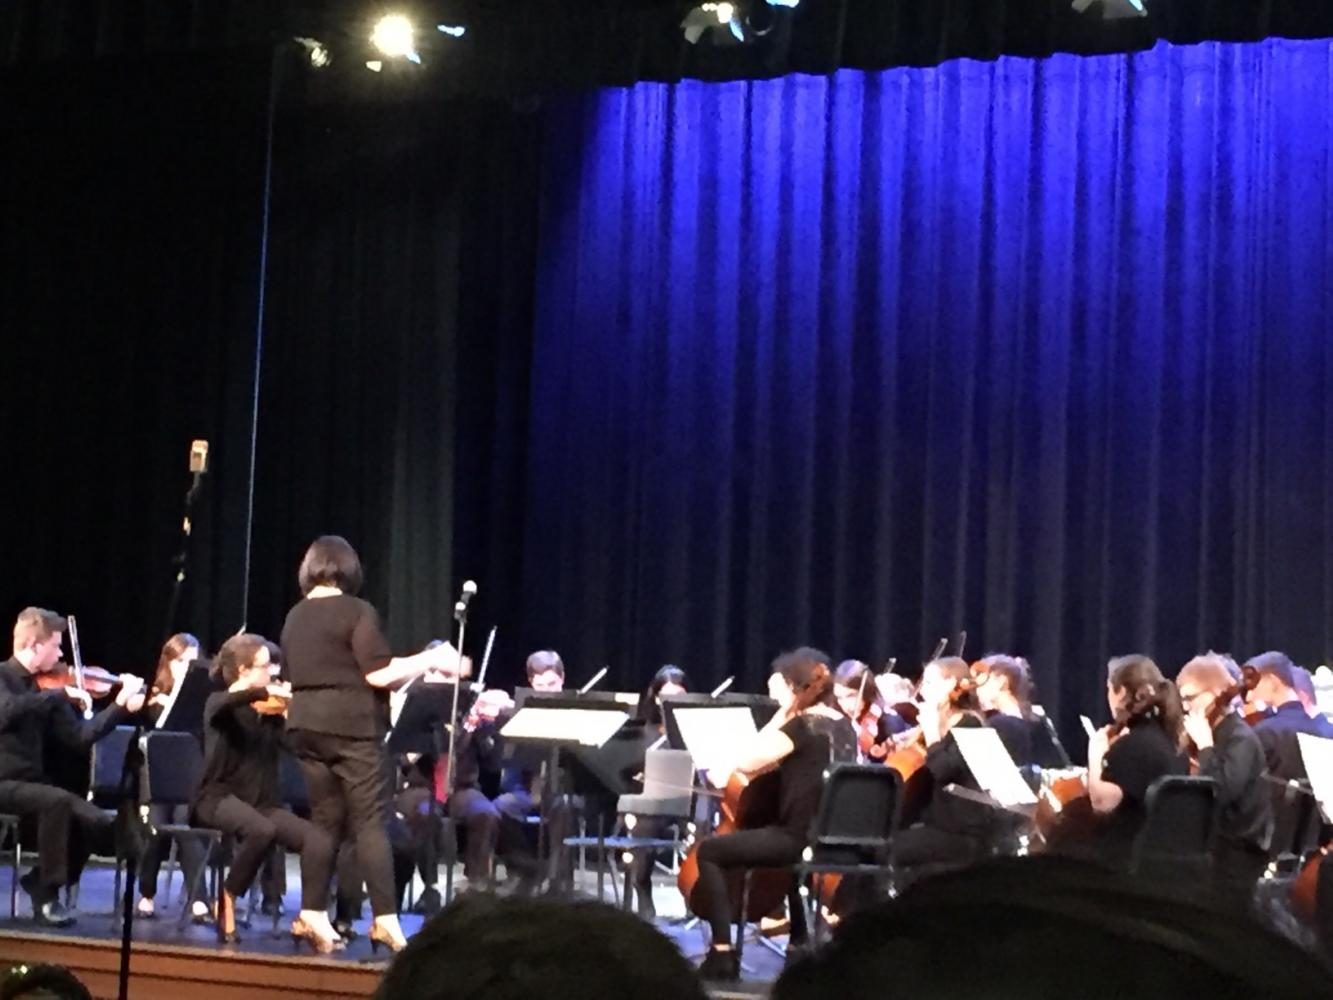 Ms.+Sassanos+chamber+winds+stringing+the+audience+along+with+their+encore+Pirates+of+the+Caribbean.+